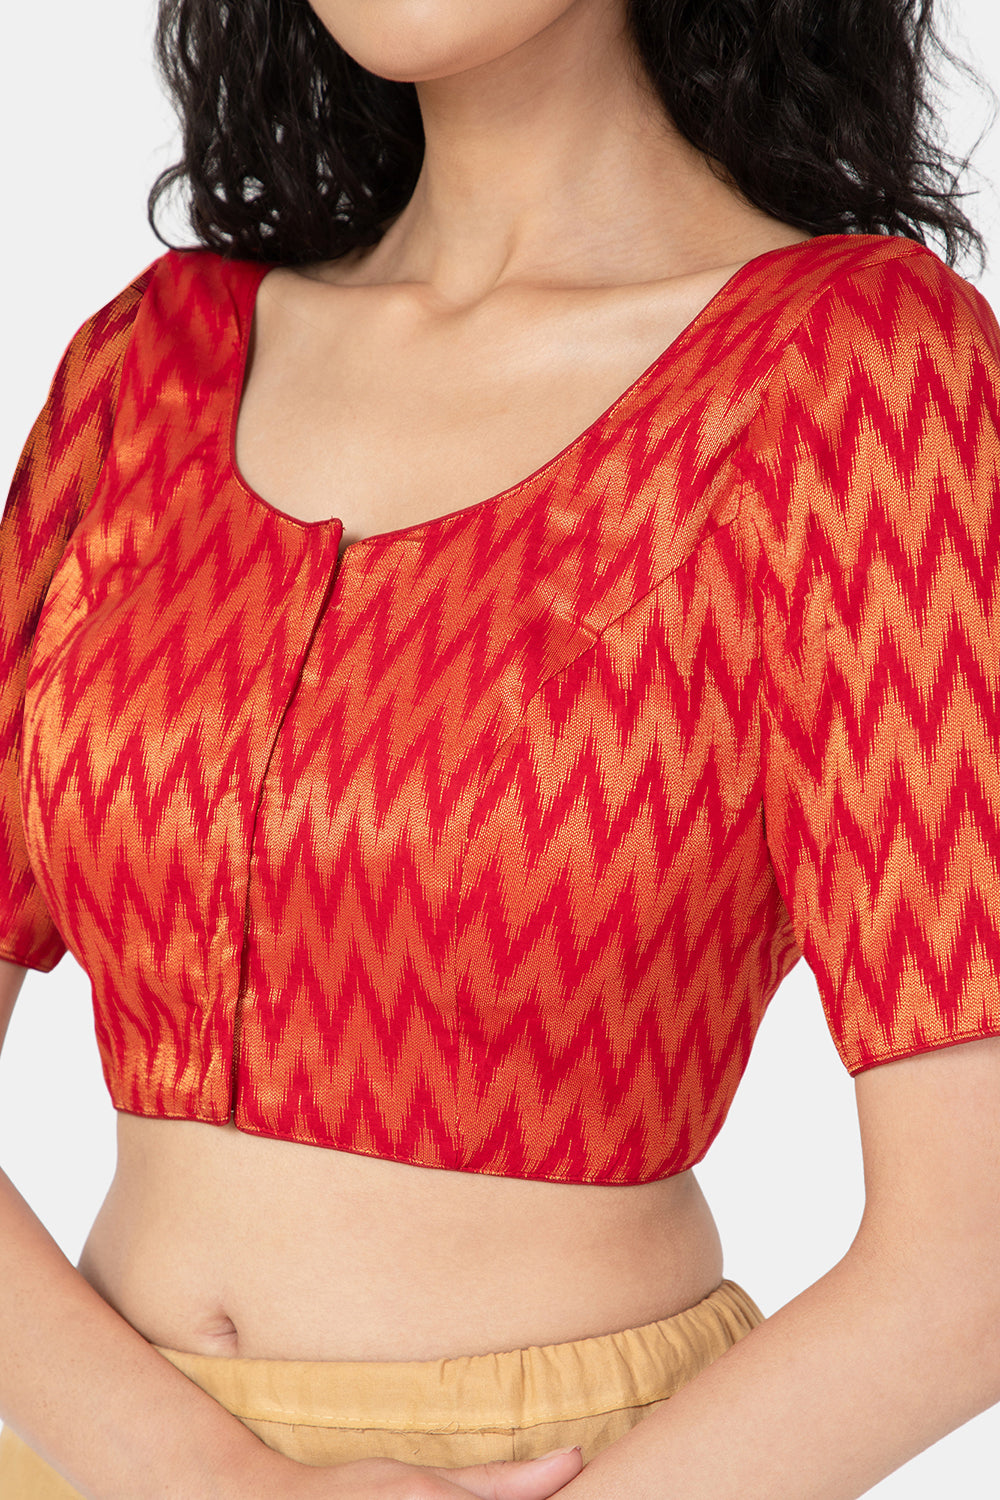 Naidu Hall Ethnic Jacquard Saree Blouse with Round Neck Elbow Sleeves - Red